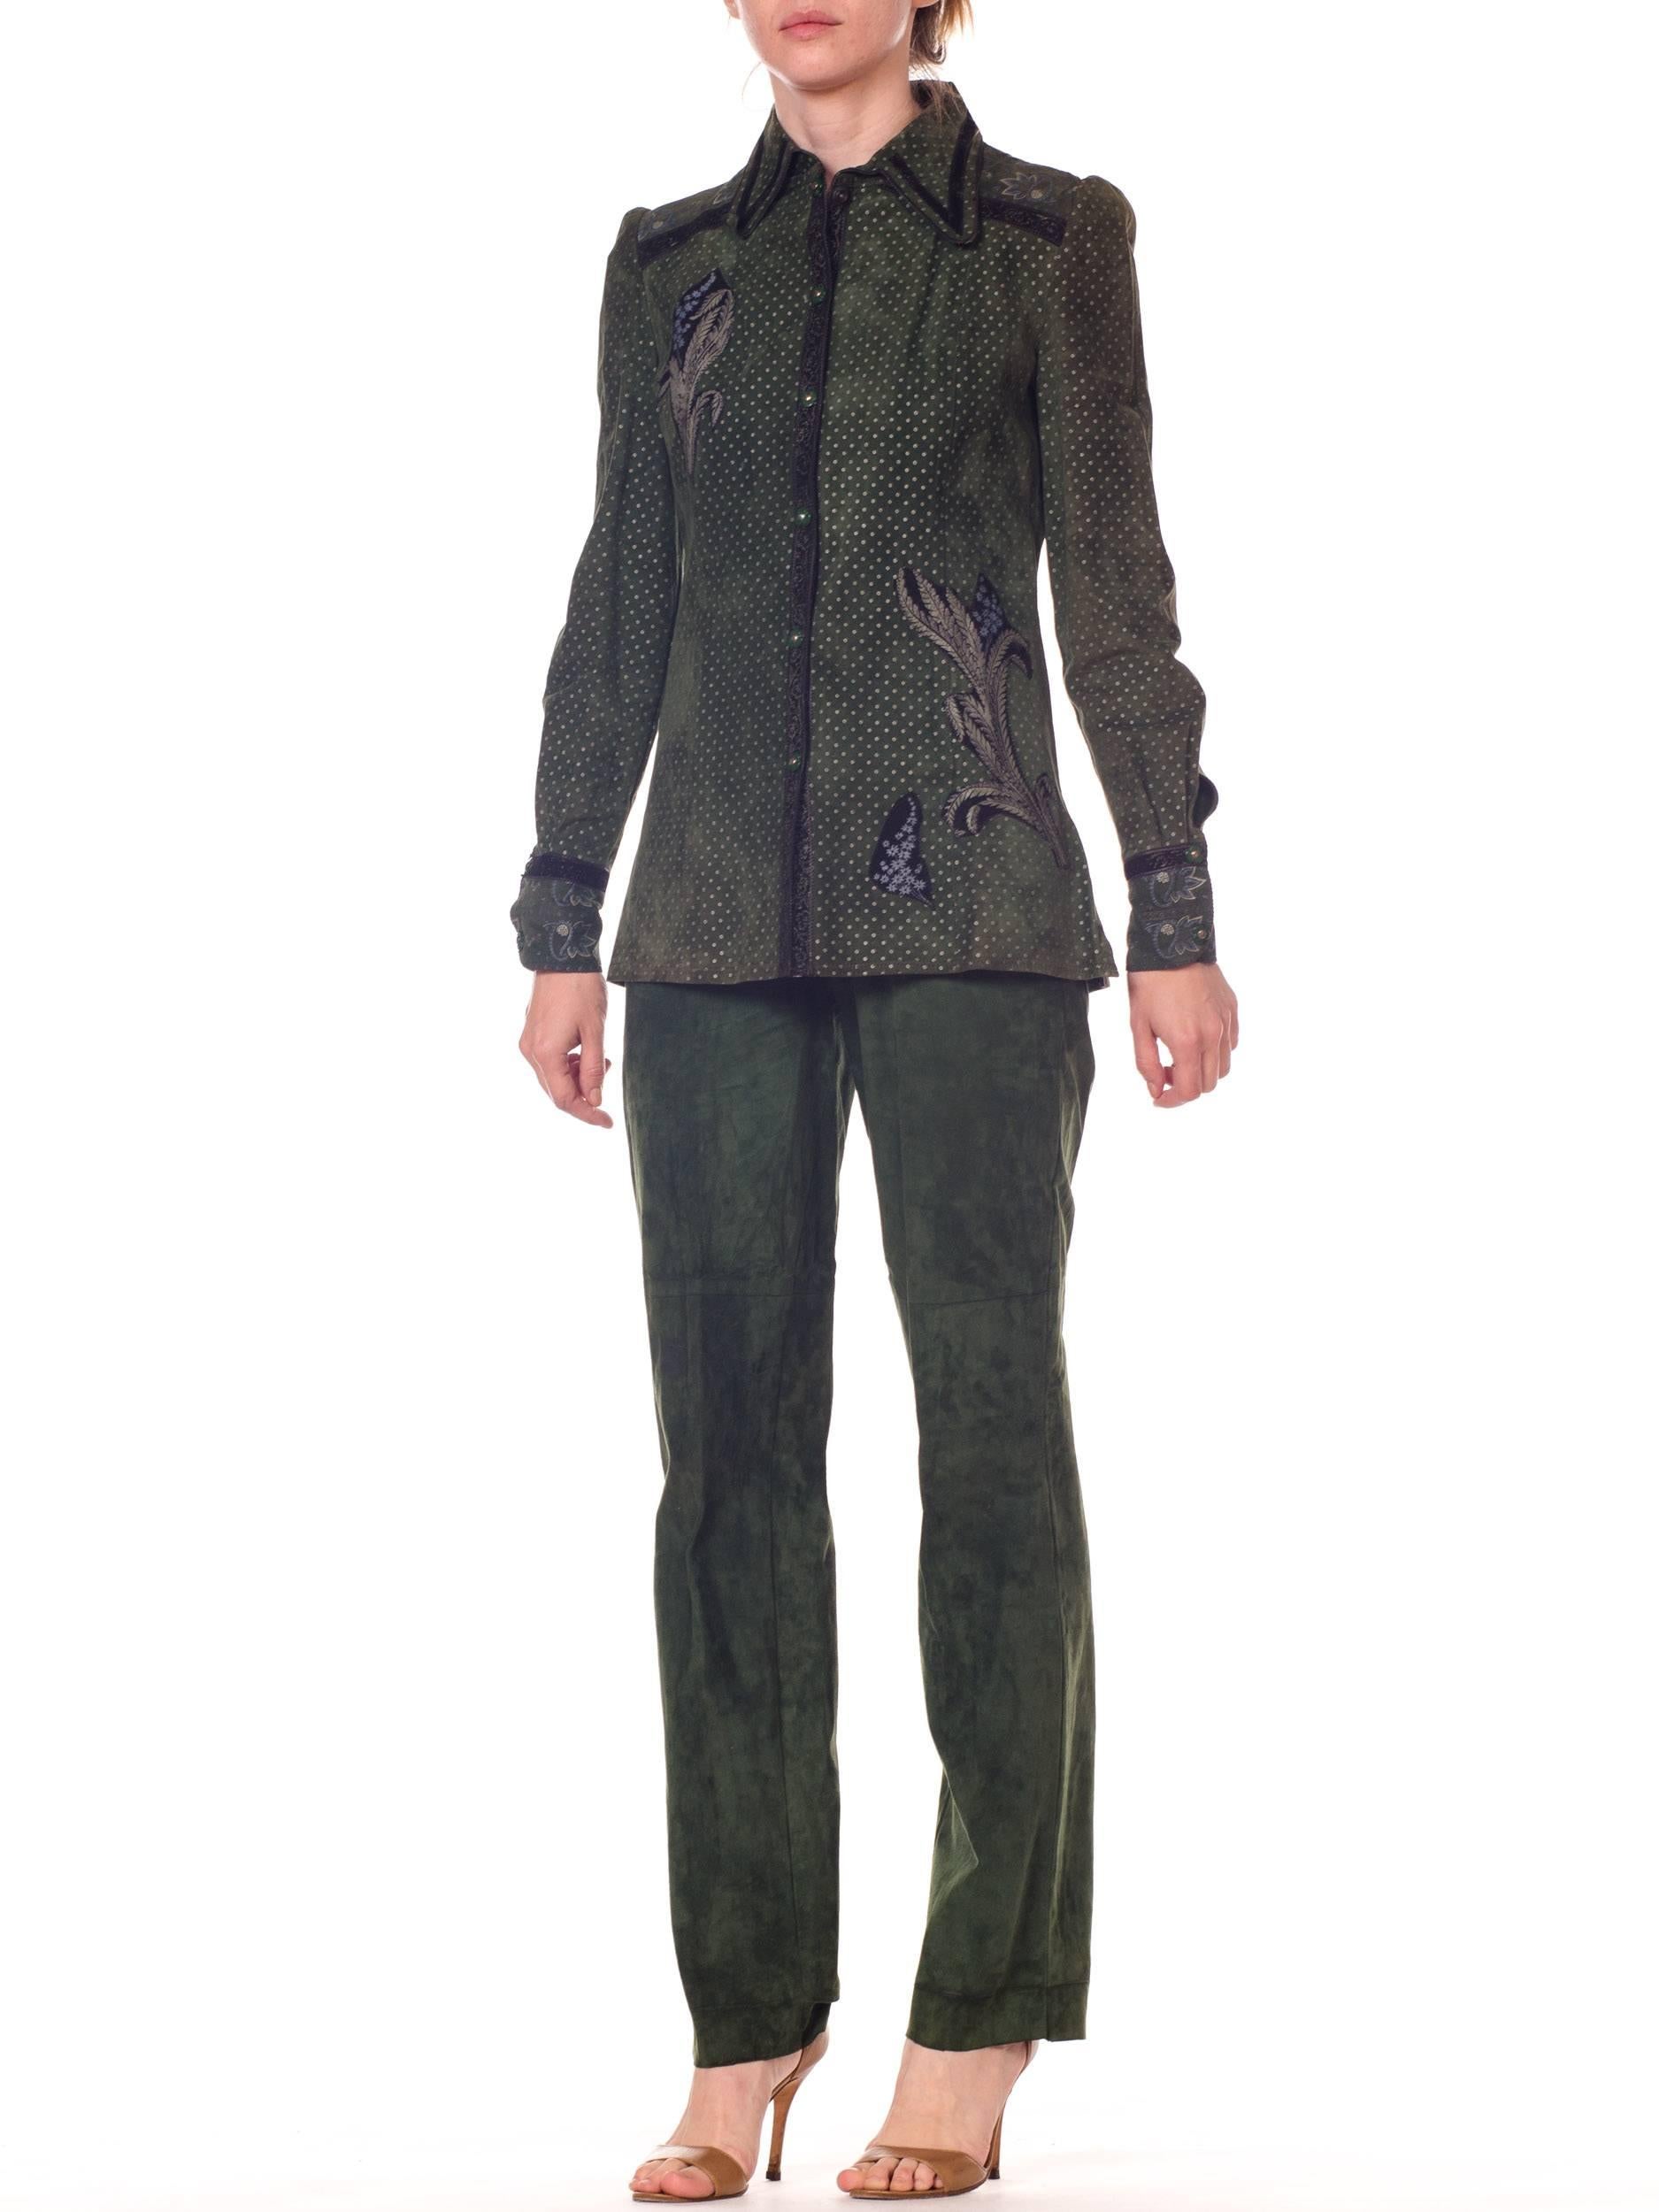 Roberto Cavalli Green Suede Pants and Jacket Set with Printed Panels and Patchwork
1970

Measurements:
Jacket: B34 W40 L28
Pants: W38 H36 L41